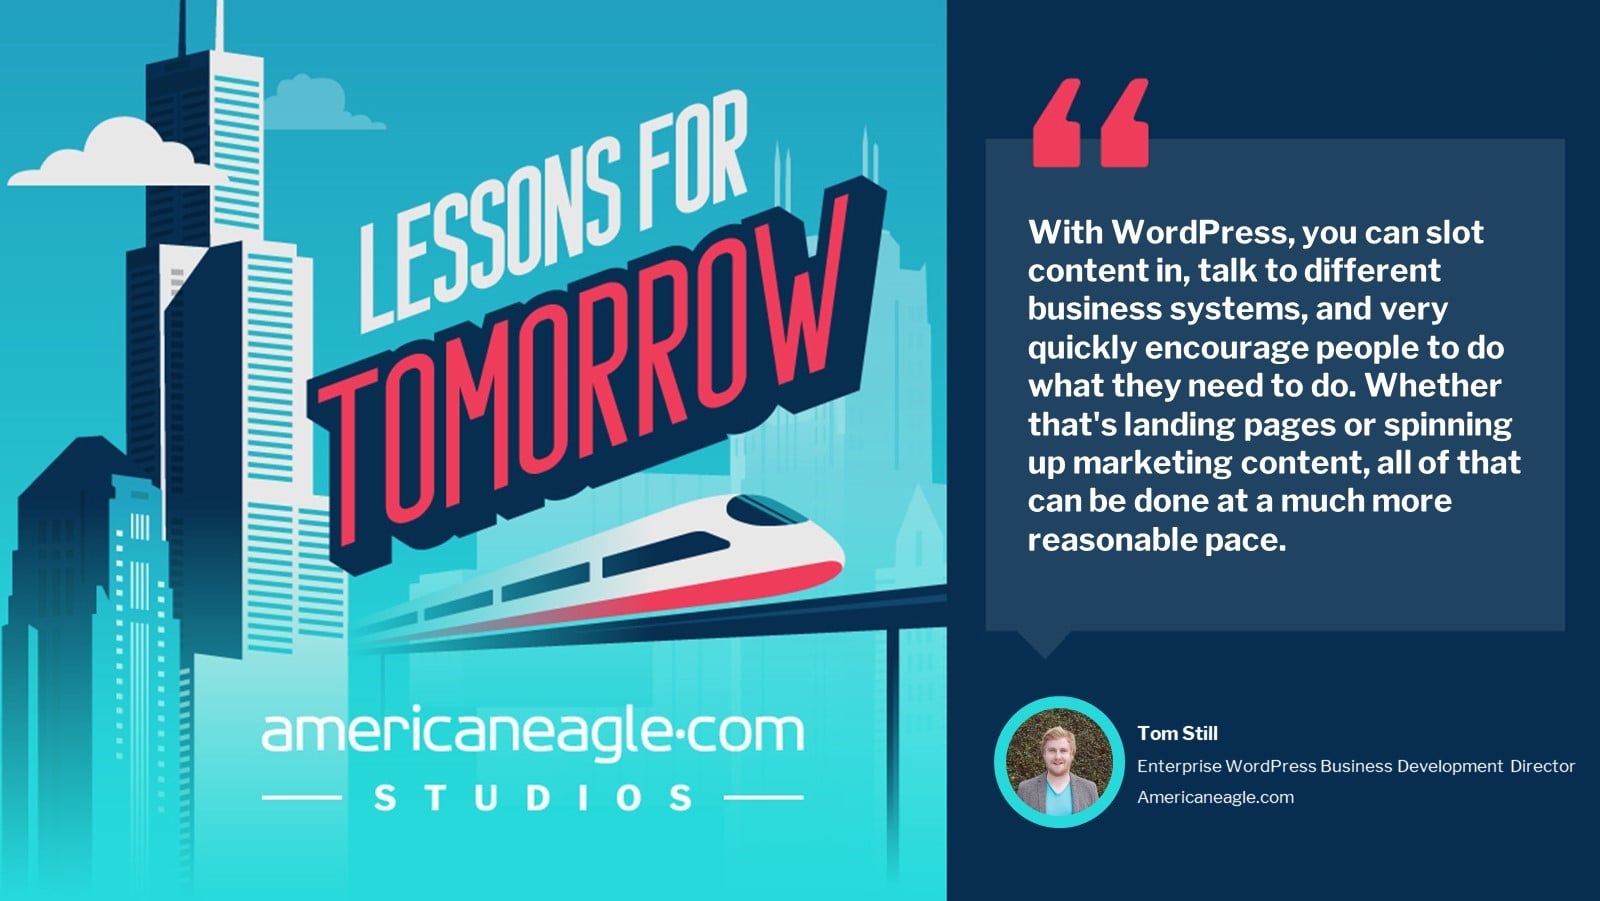 Tom Still discusses WordPress during the Lessons for Tomorrow Podcast